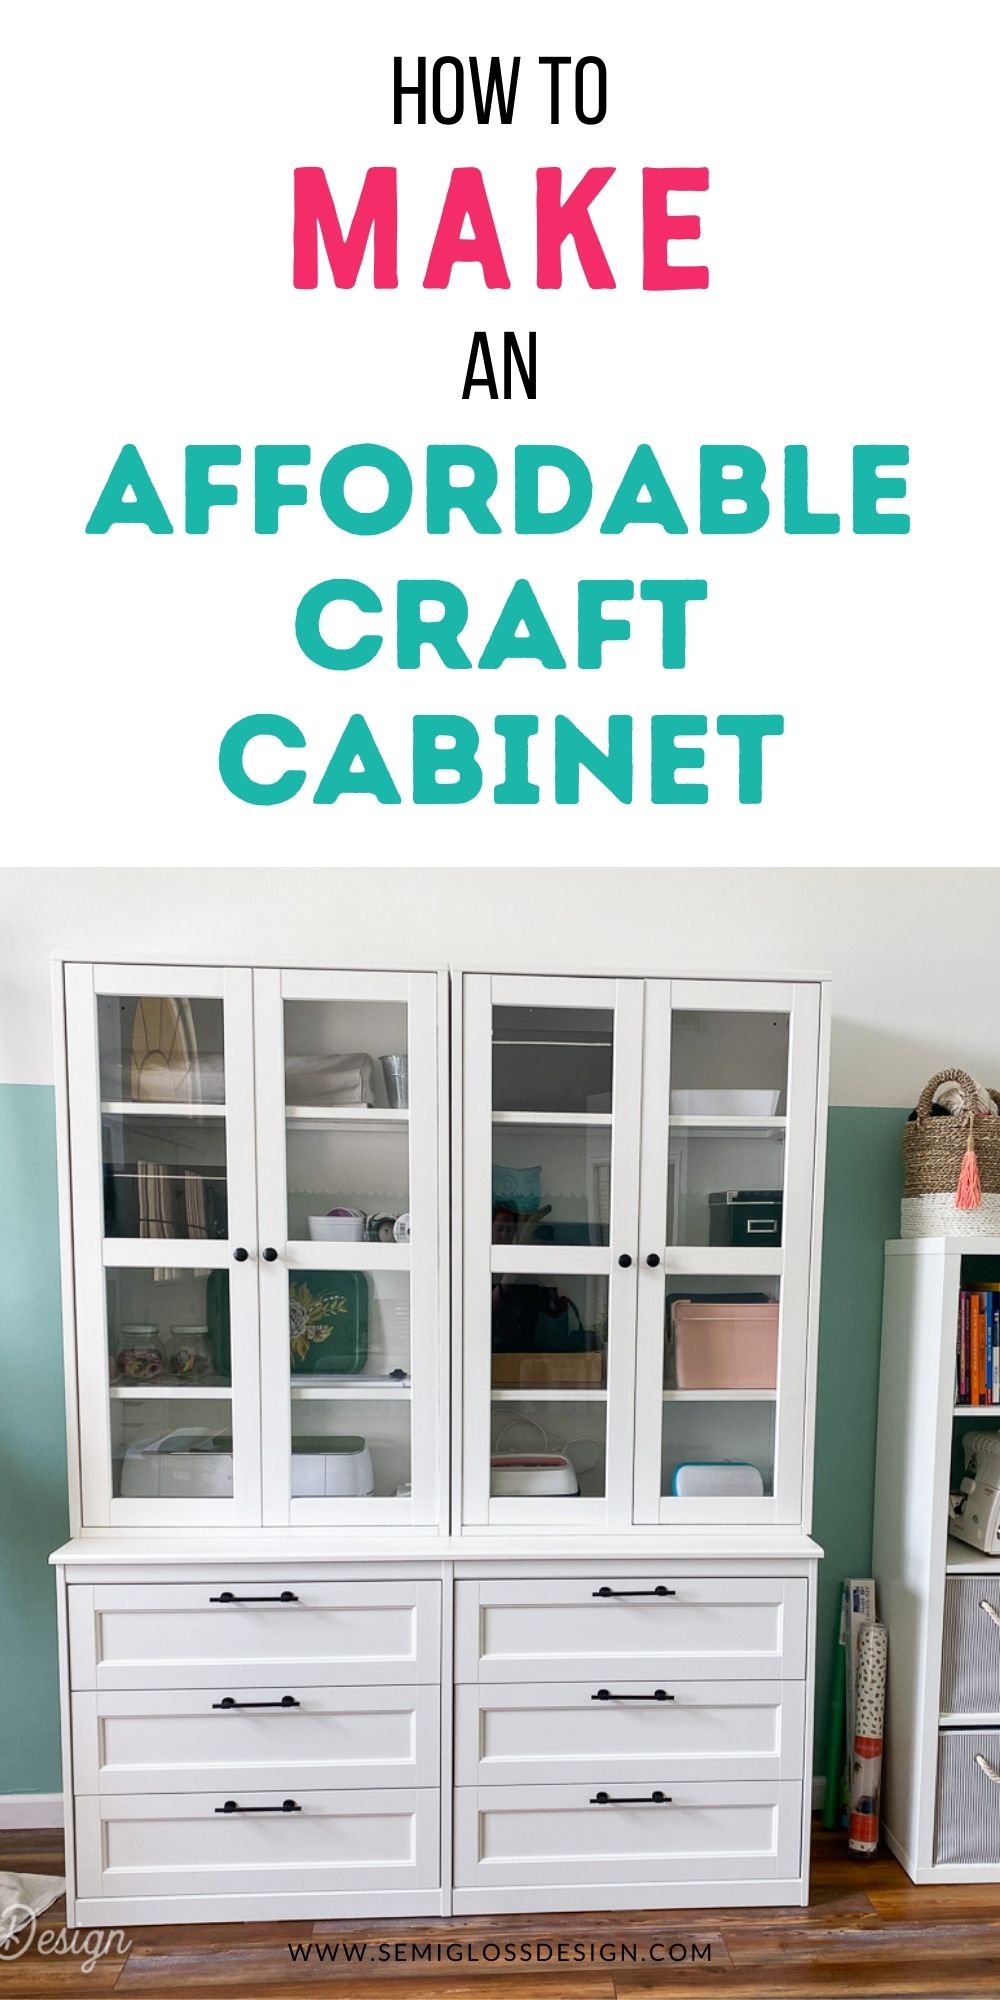 Dreambox Craft Storage Cabinet - Is the Dreambox Right For You?